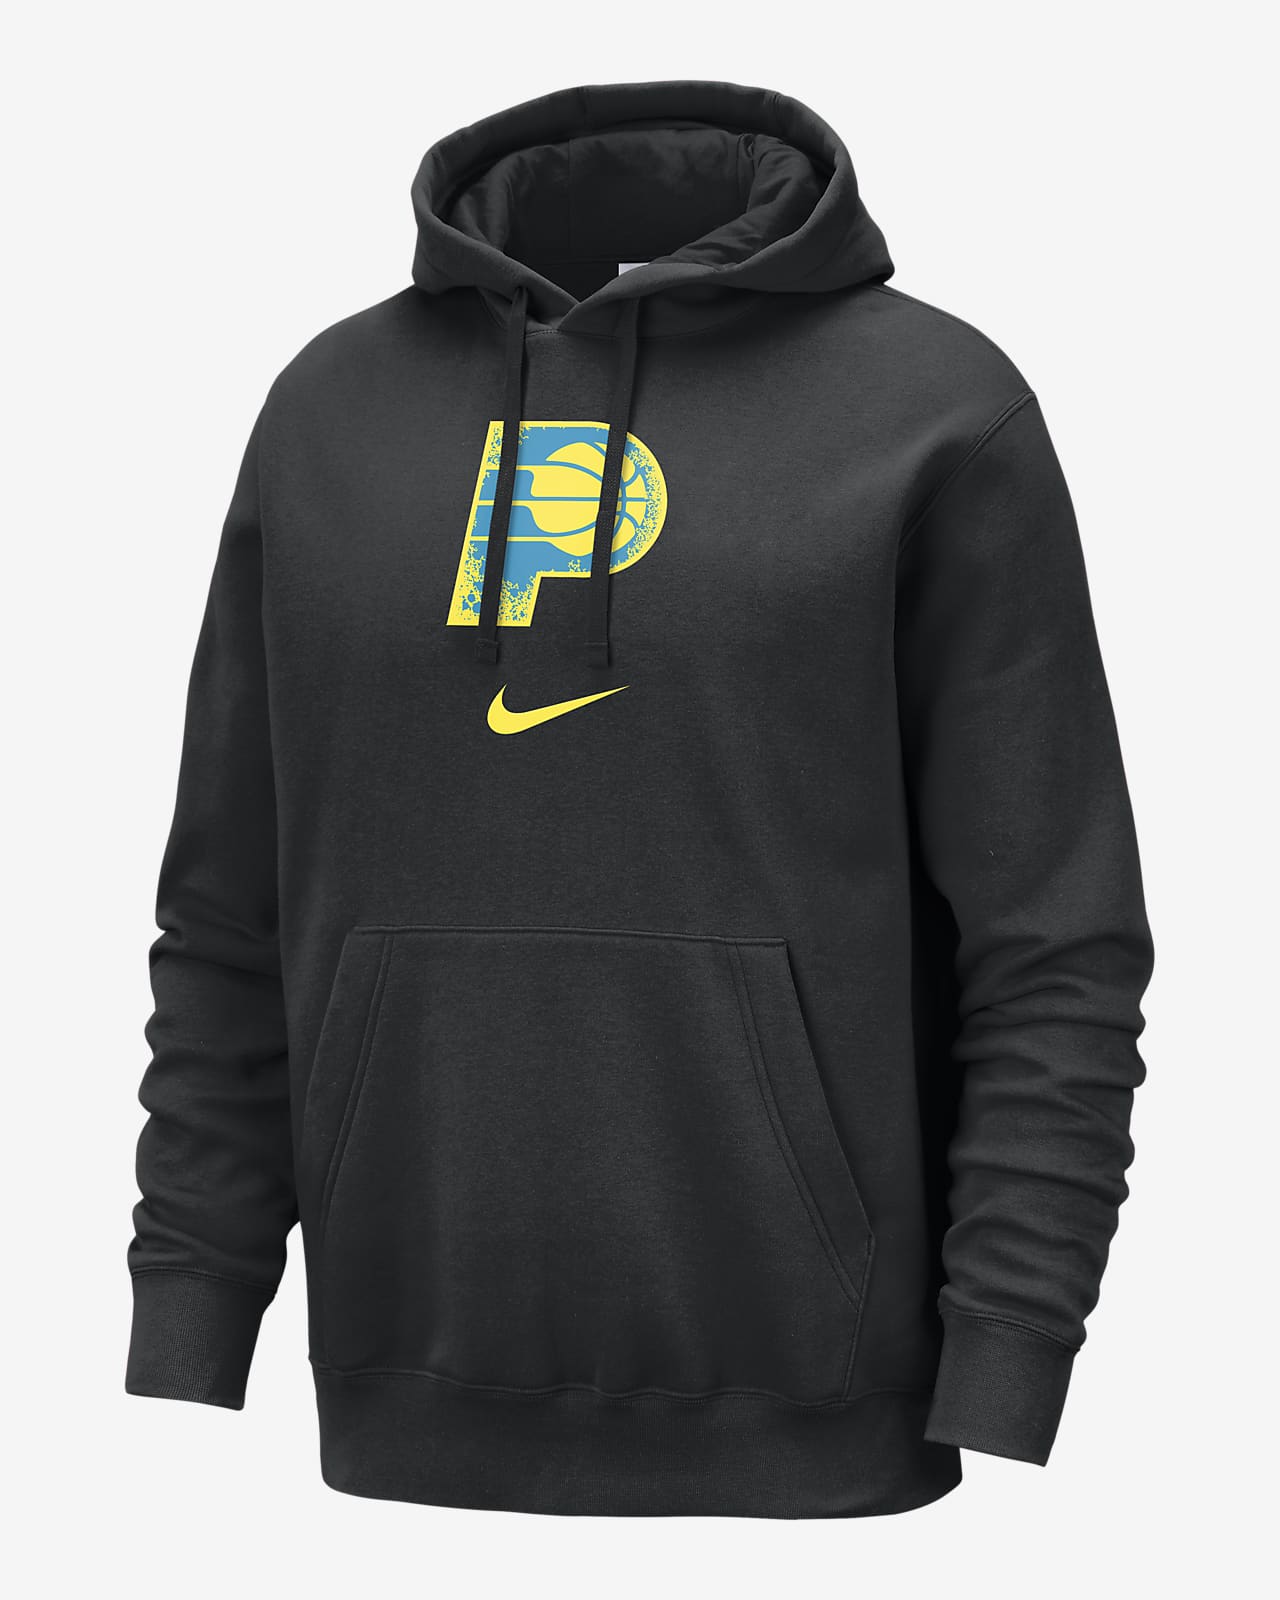 Indiana Pacers Club Fleece City Edition Men's Nike NBA Pullover